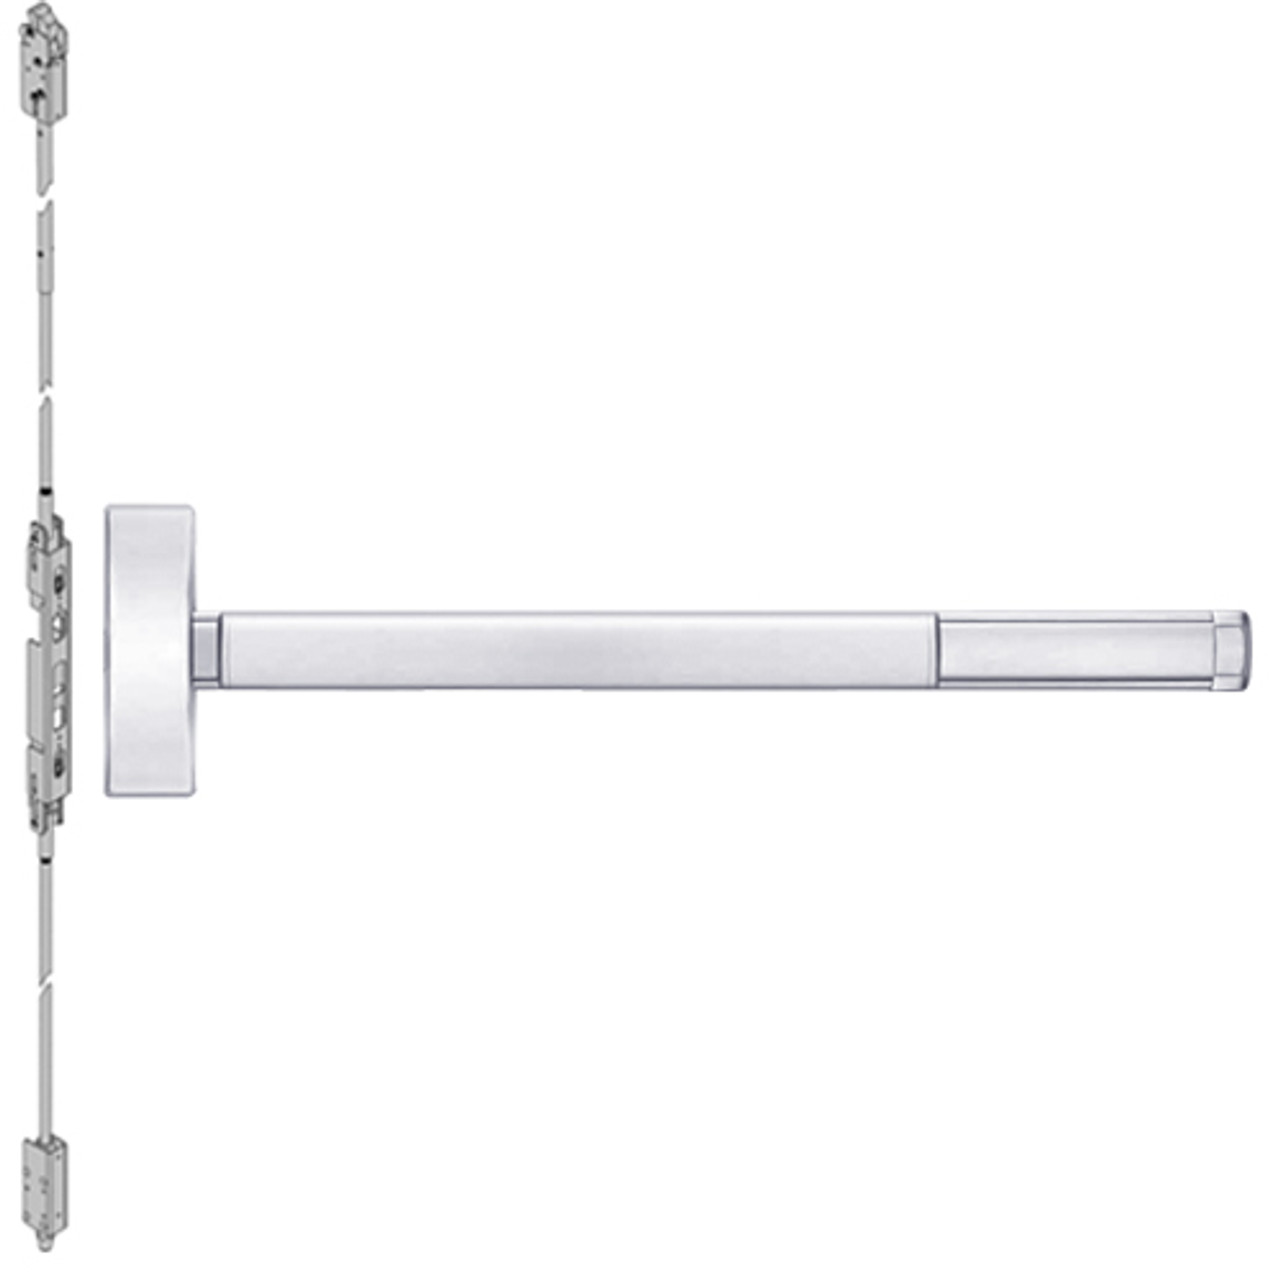 ELR2803LBR-625-48 PHI 2800 Series Concealed Vertical Rod Exit Device with Electric Latch Retraction Prepped for Key Retracts Latchbolt in Bright Chrome Finish